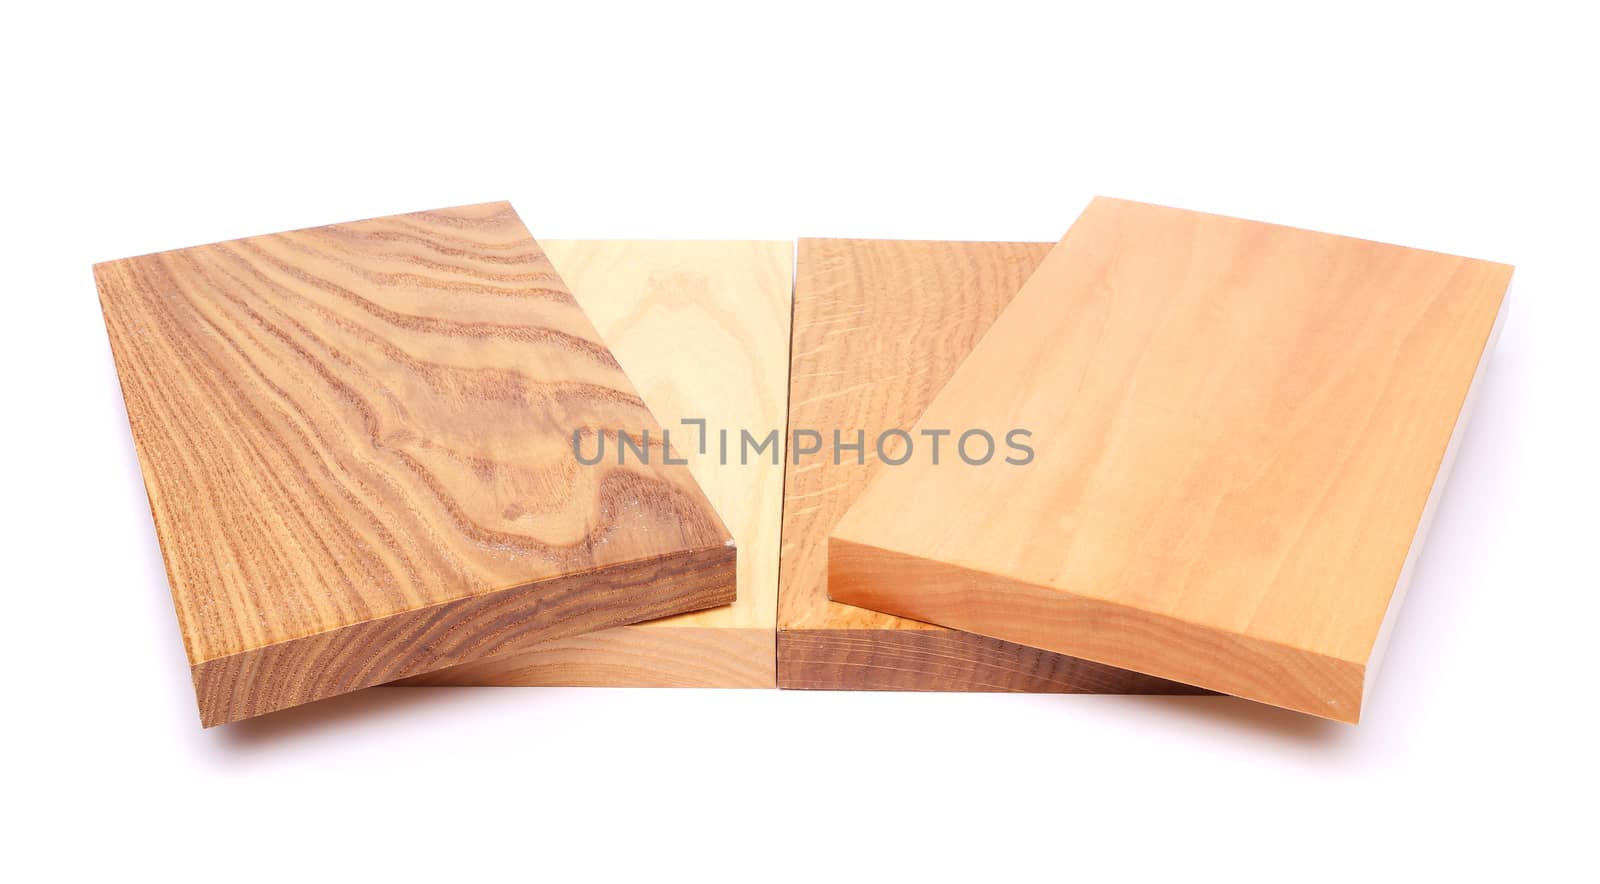 Four wooden plank close-up are located on the white background